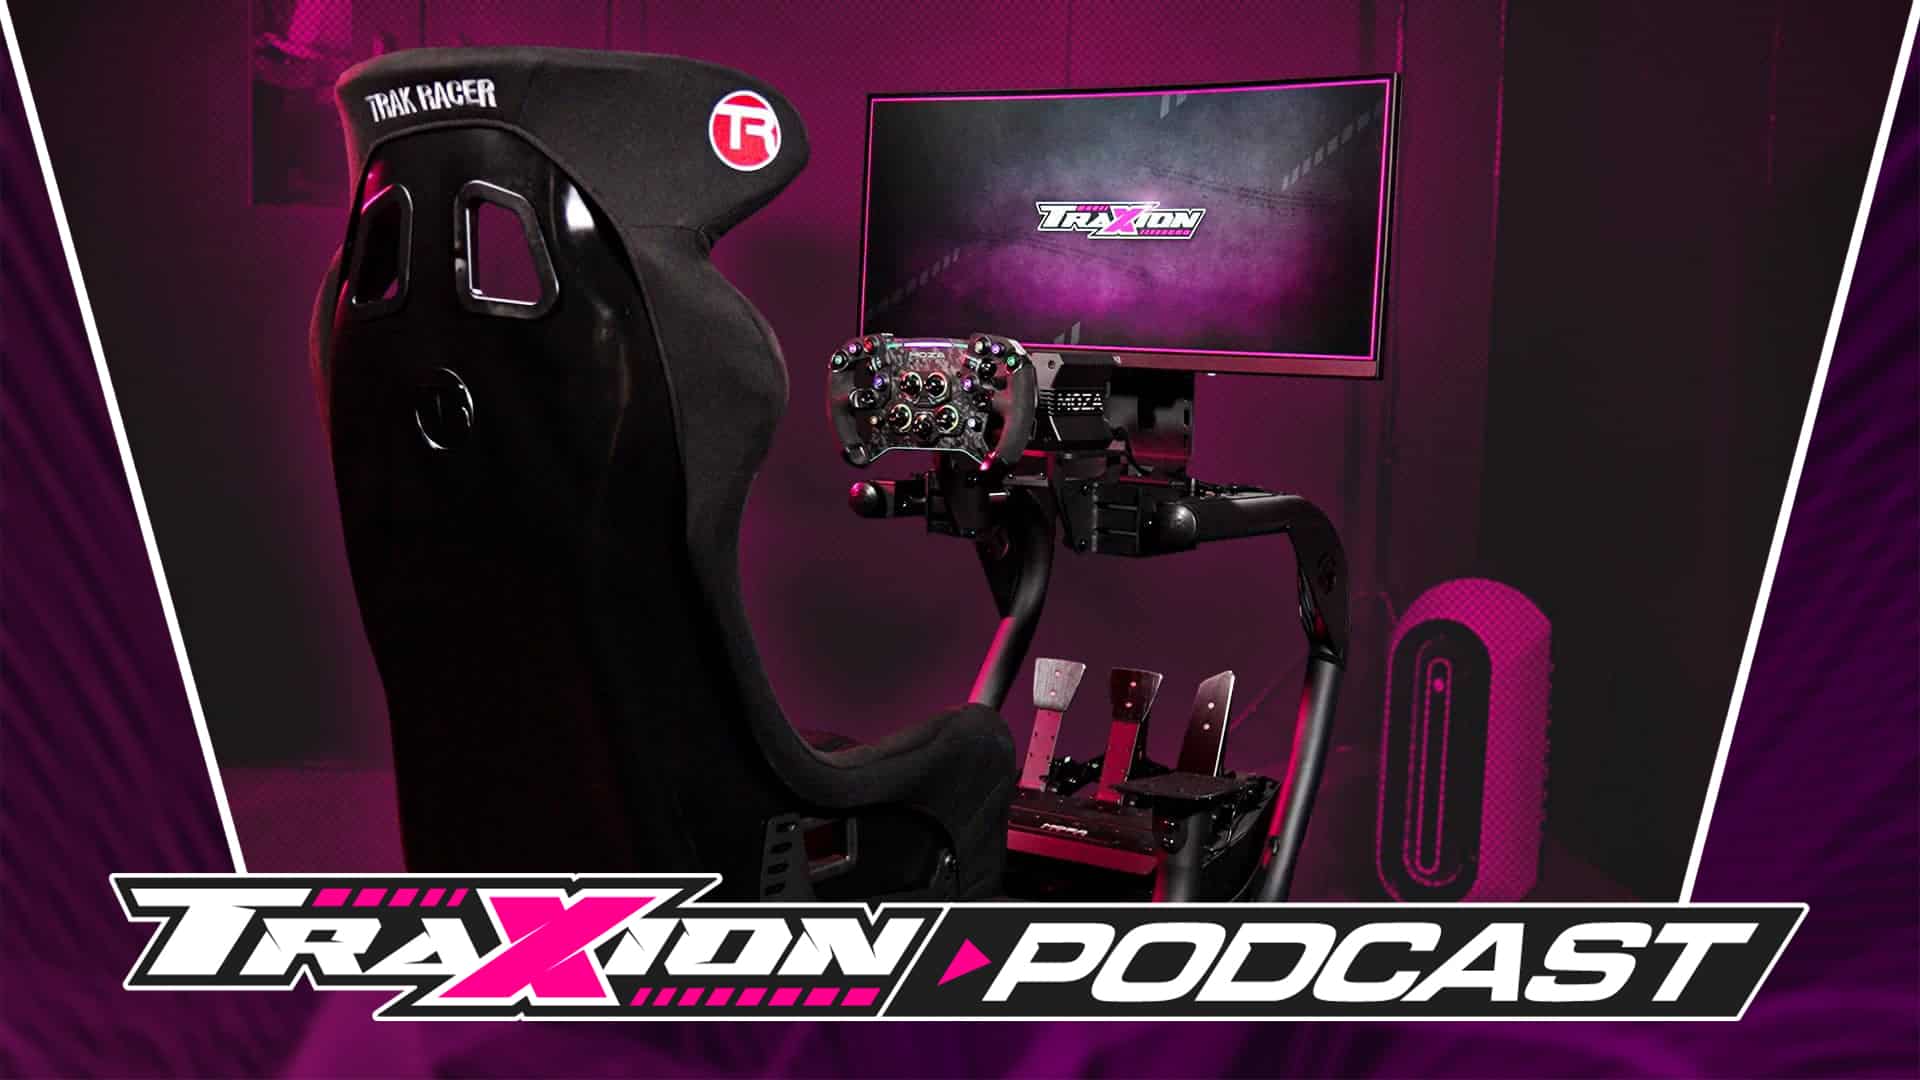 Inside Track Racer's sim racing hardware plans, with CEO Matt Sten | Traxion.GG Podcast S5 E6